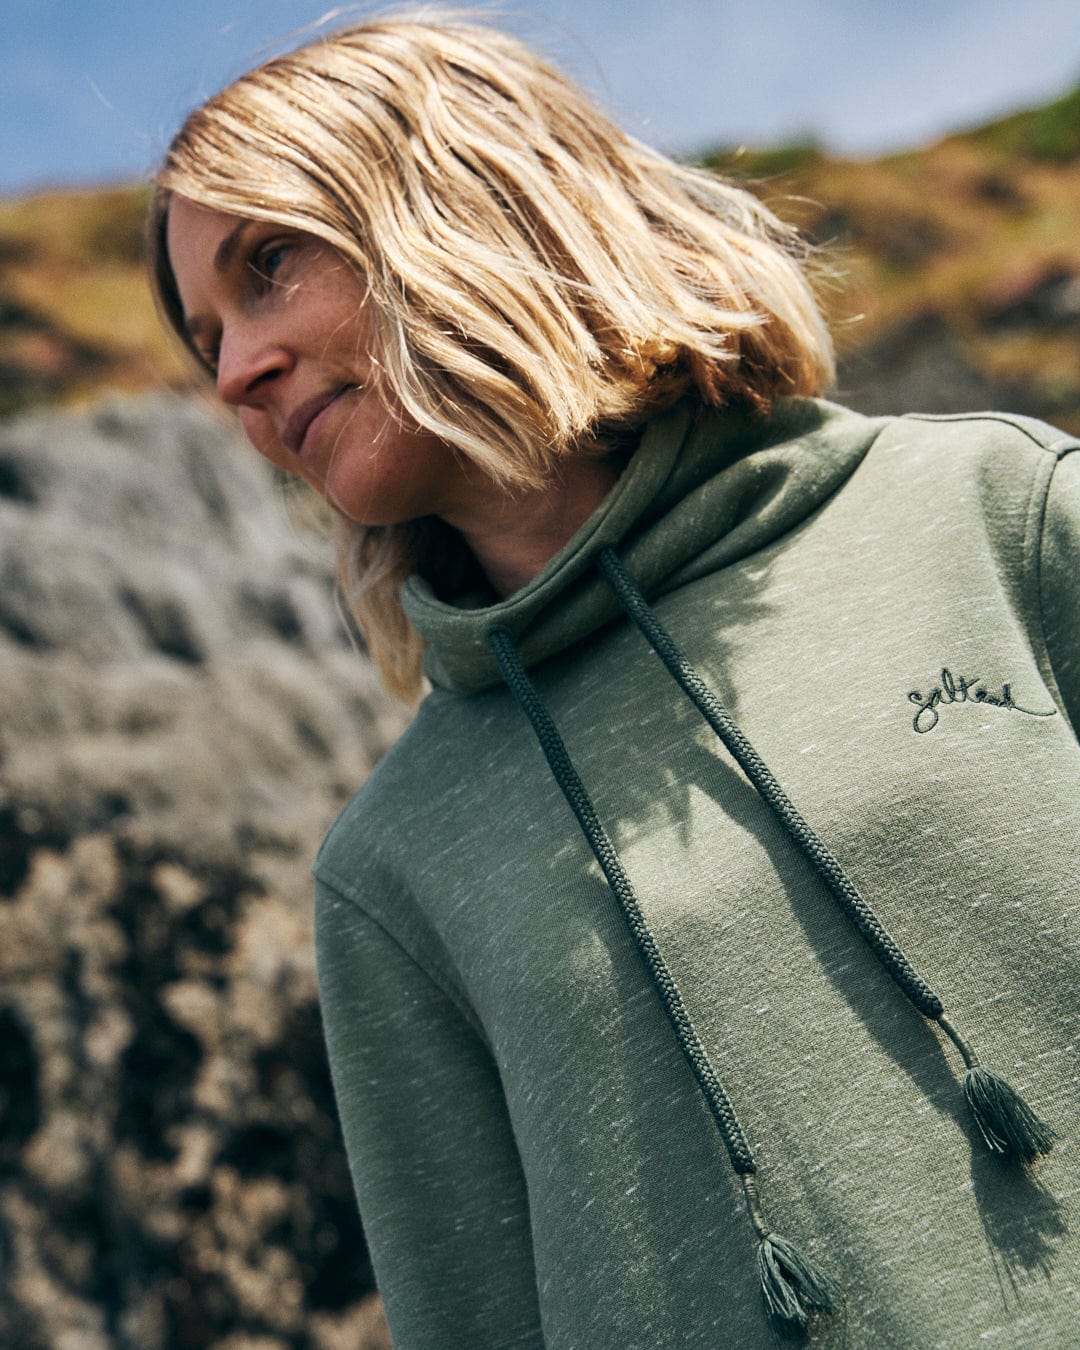 A person with shoulder-length blonde hair is wearing the Harper - Womens Longline Pop Sweat by Saltrock, featuring a green color, drawstrings, and embroidered branding, standing outdoors in front of rocky terrain.